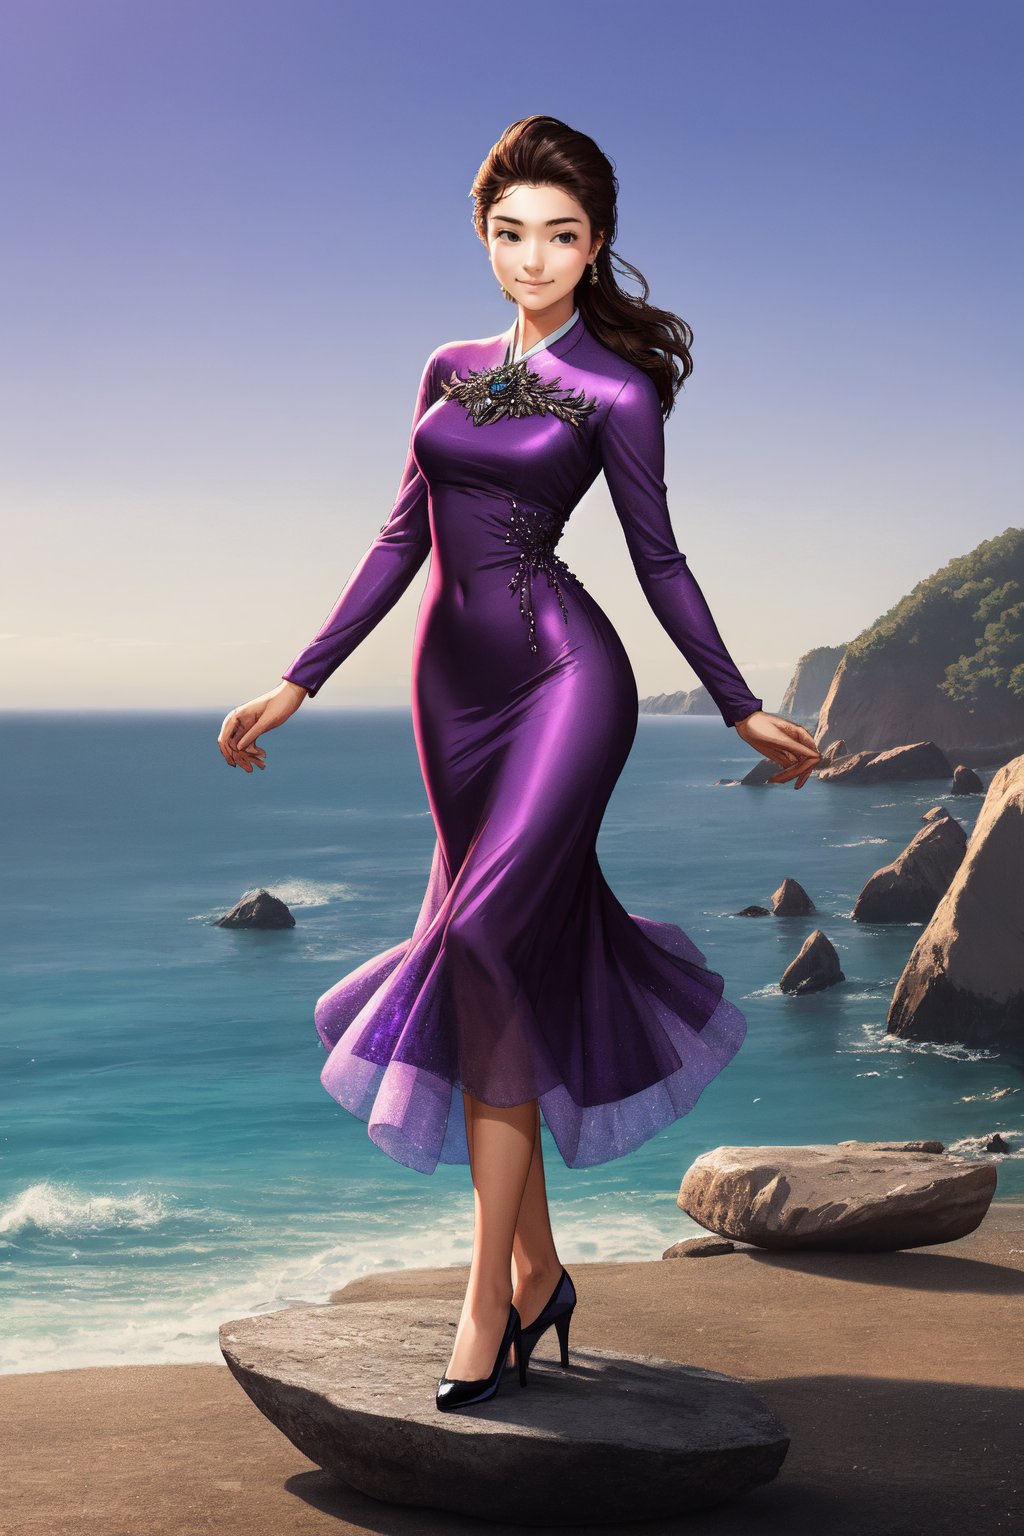 A Korean beauty wearing an elegant purple crystal dress stood on a rock by the sea and smiled.